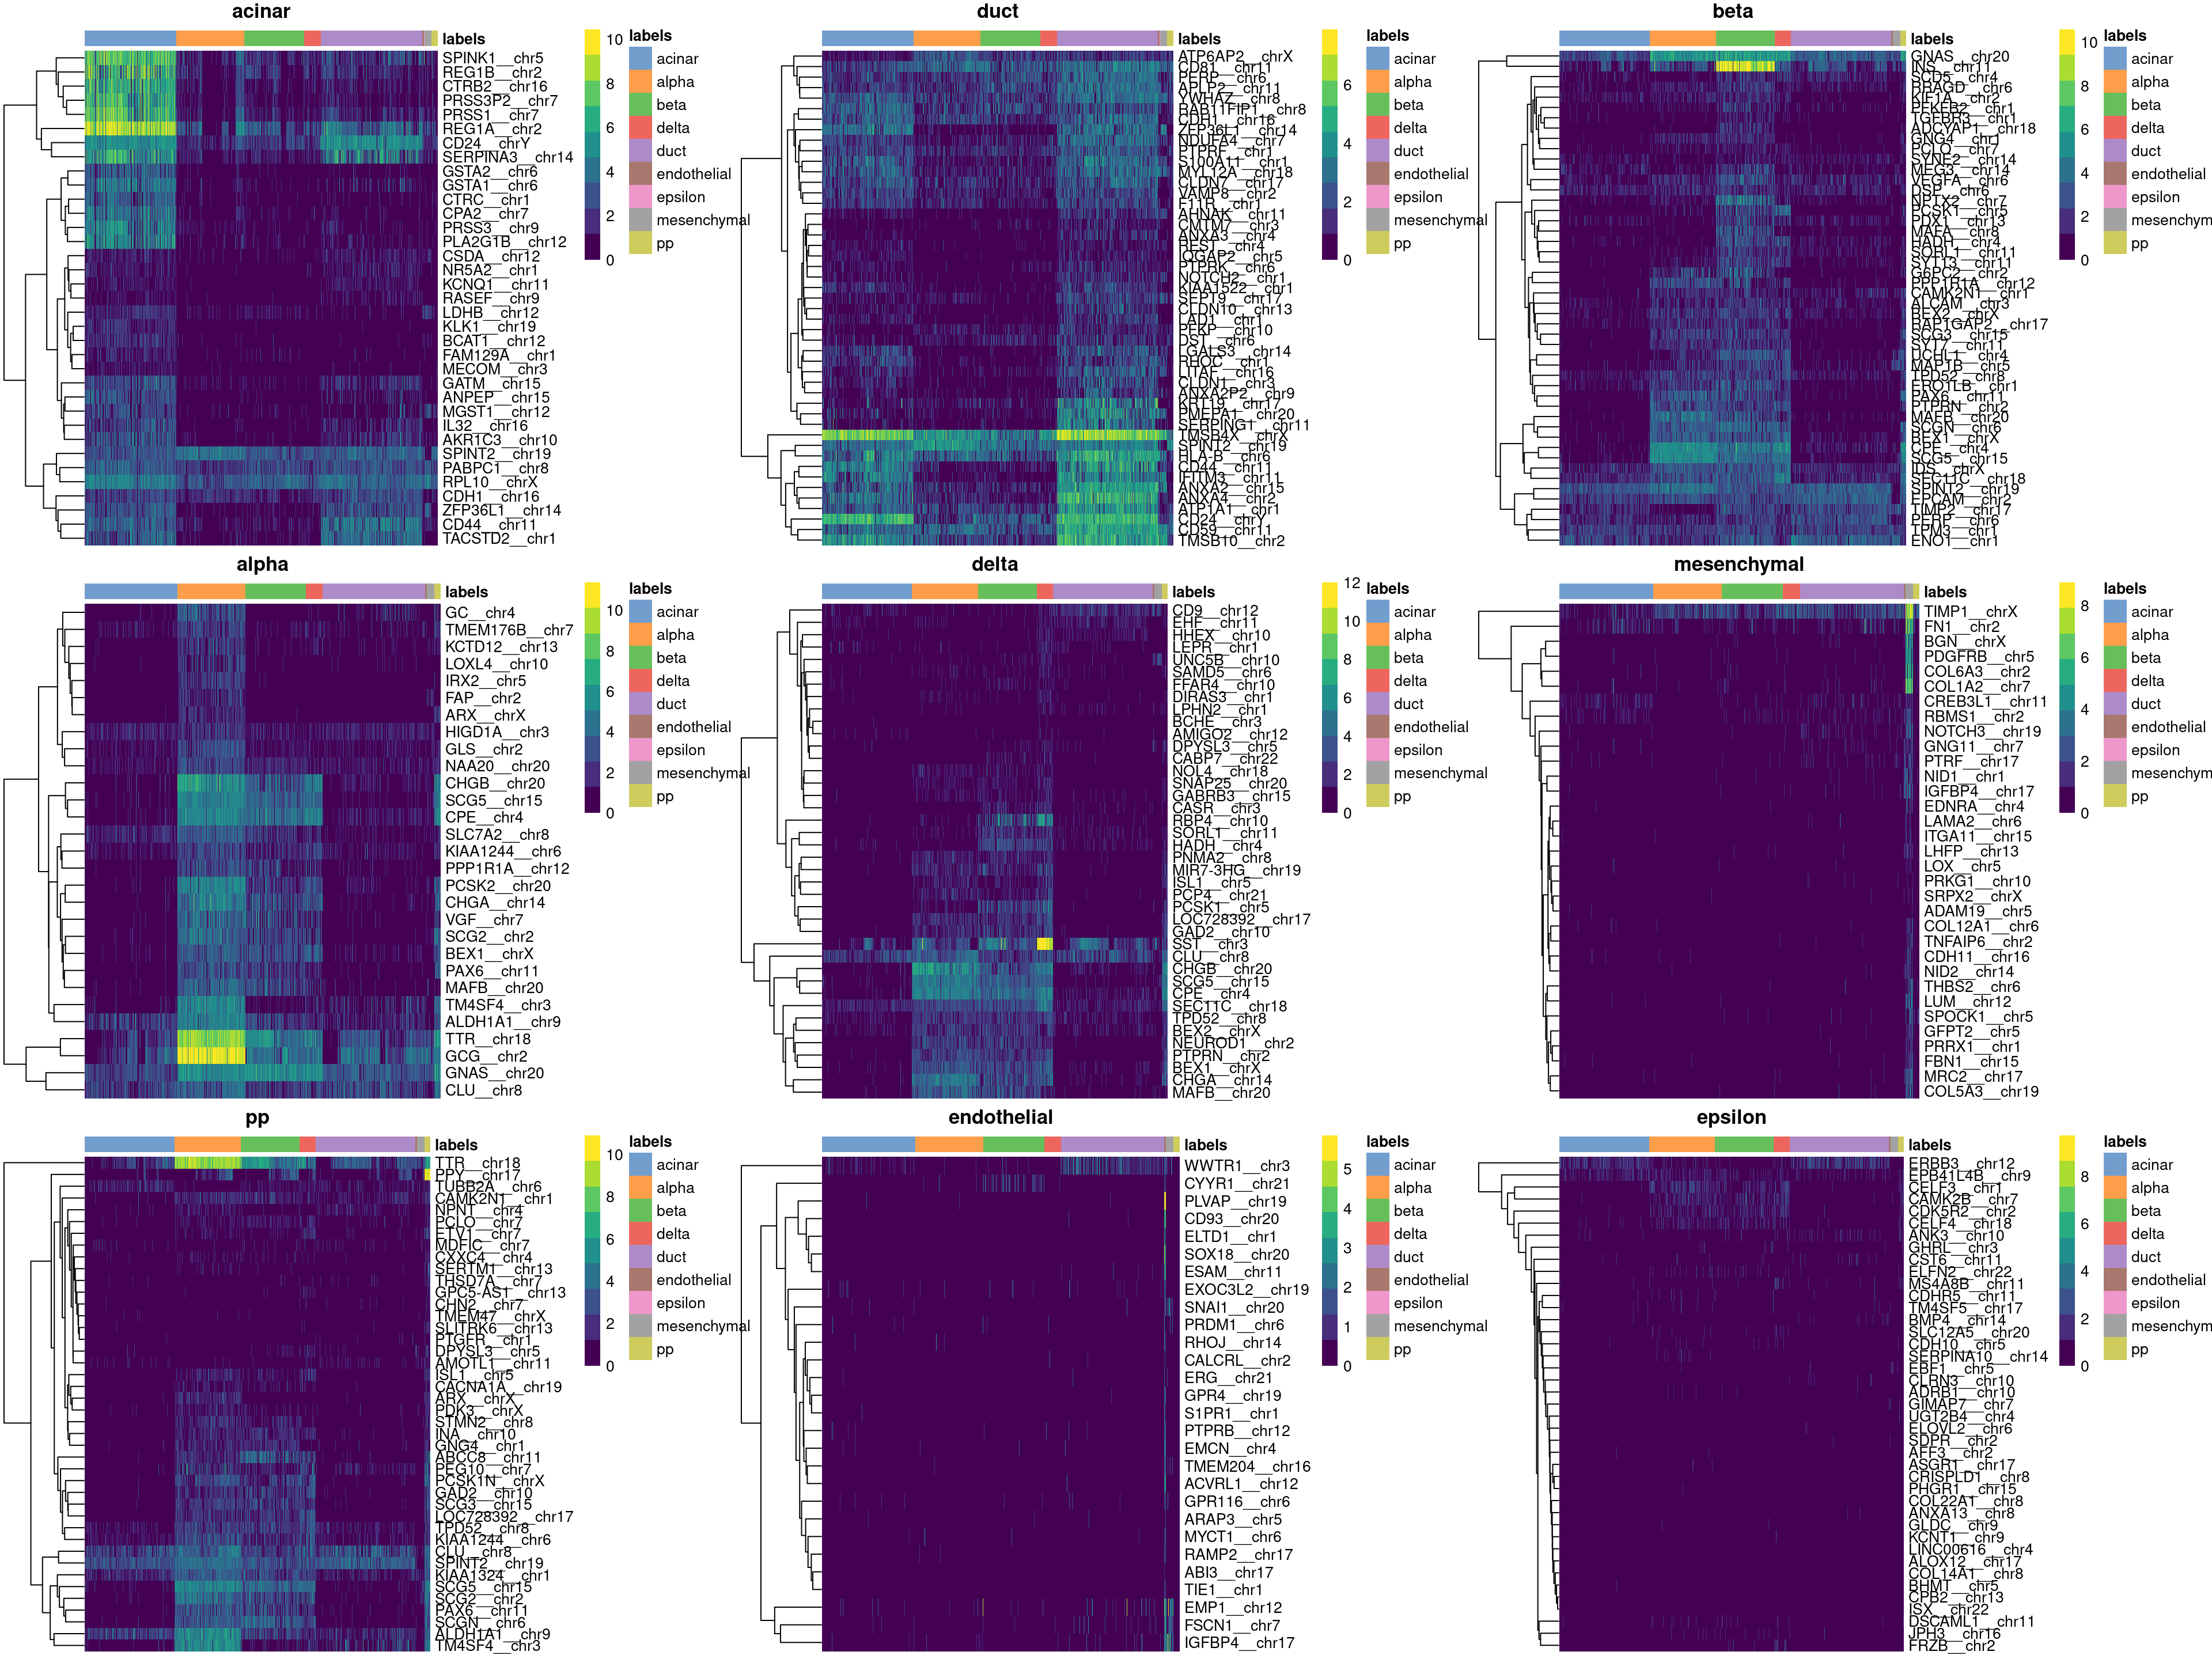 Heatmaps of log-expression values in the Grun dataset for all marker genes upregulated in each label in the Muraro reference dataset. Assigned labels for each cell are shown at the top of each plot.